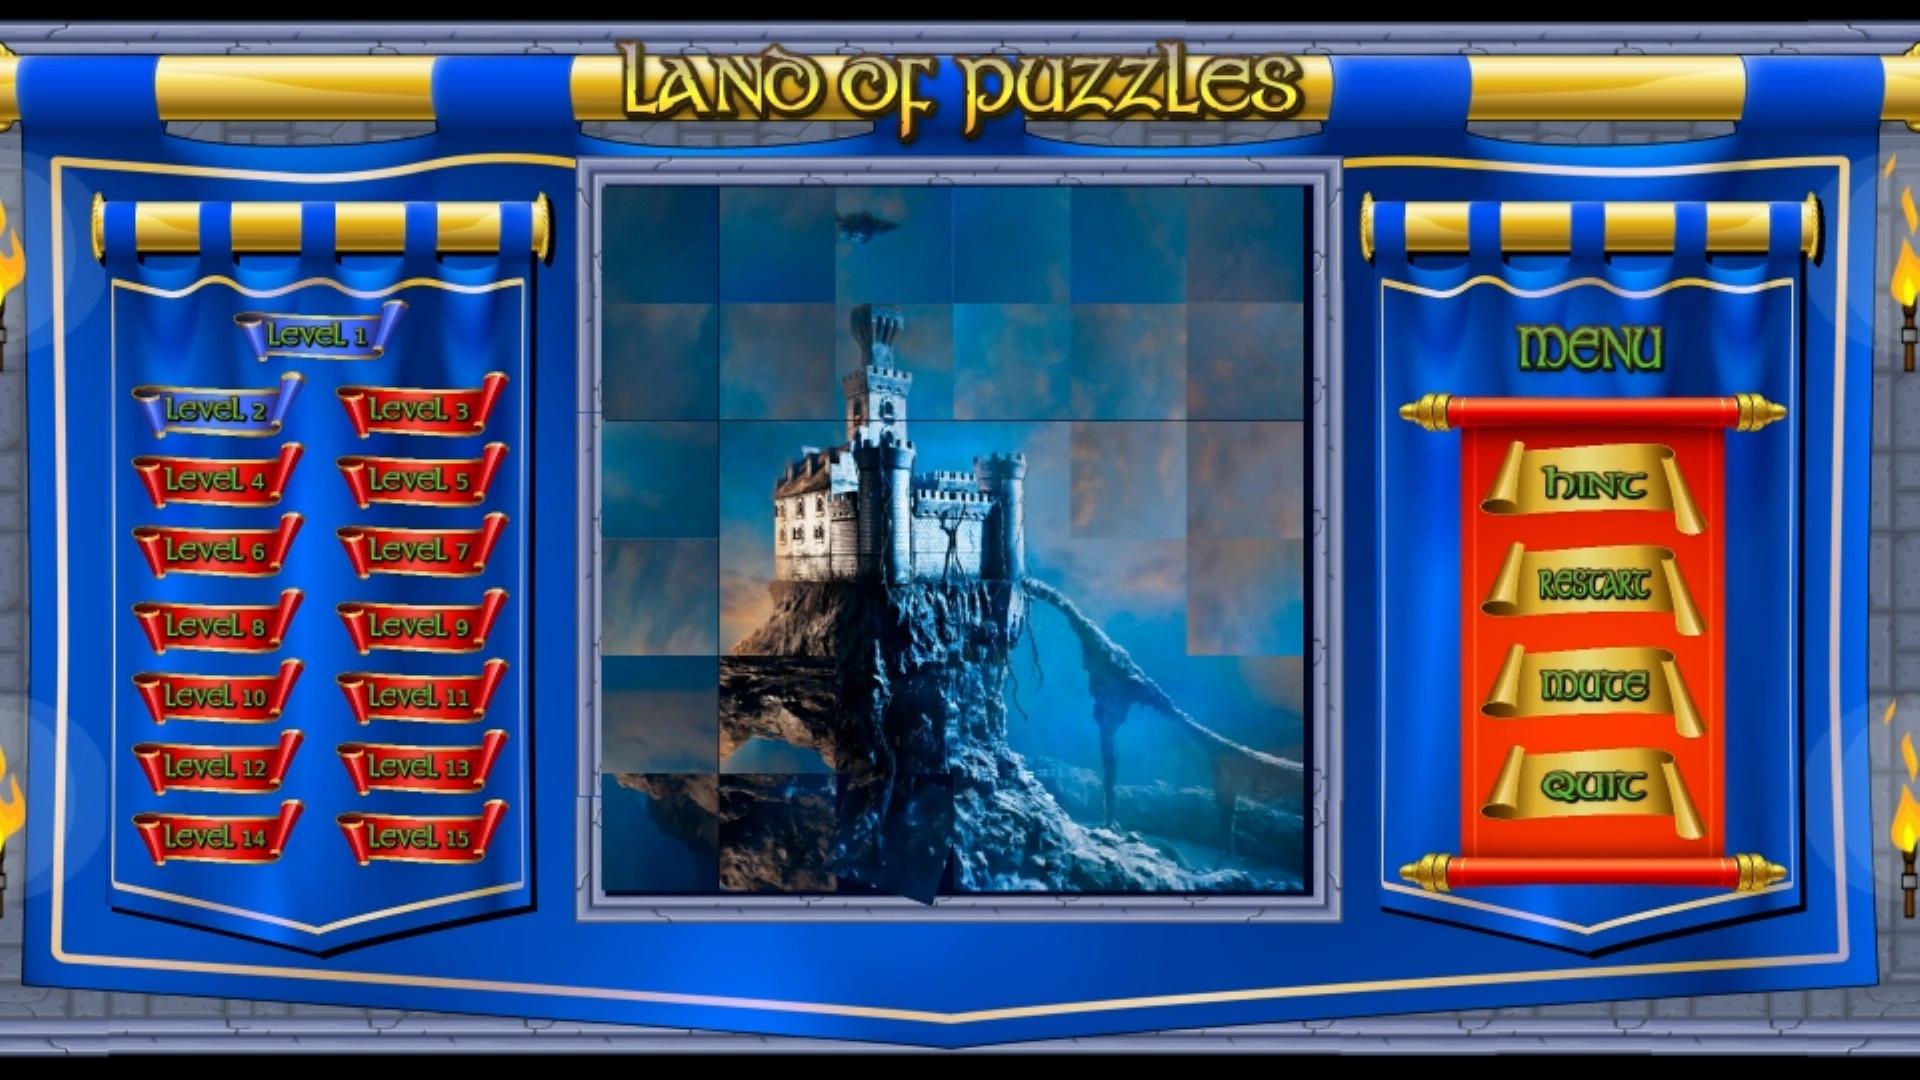 [$ 0.47] Land of Puzzles: Castles Steam CD Key